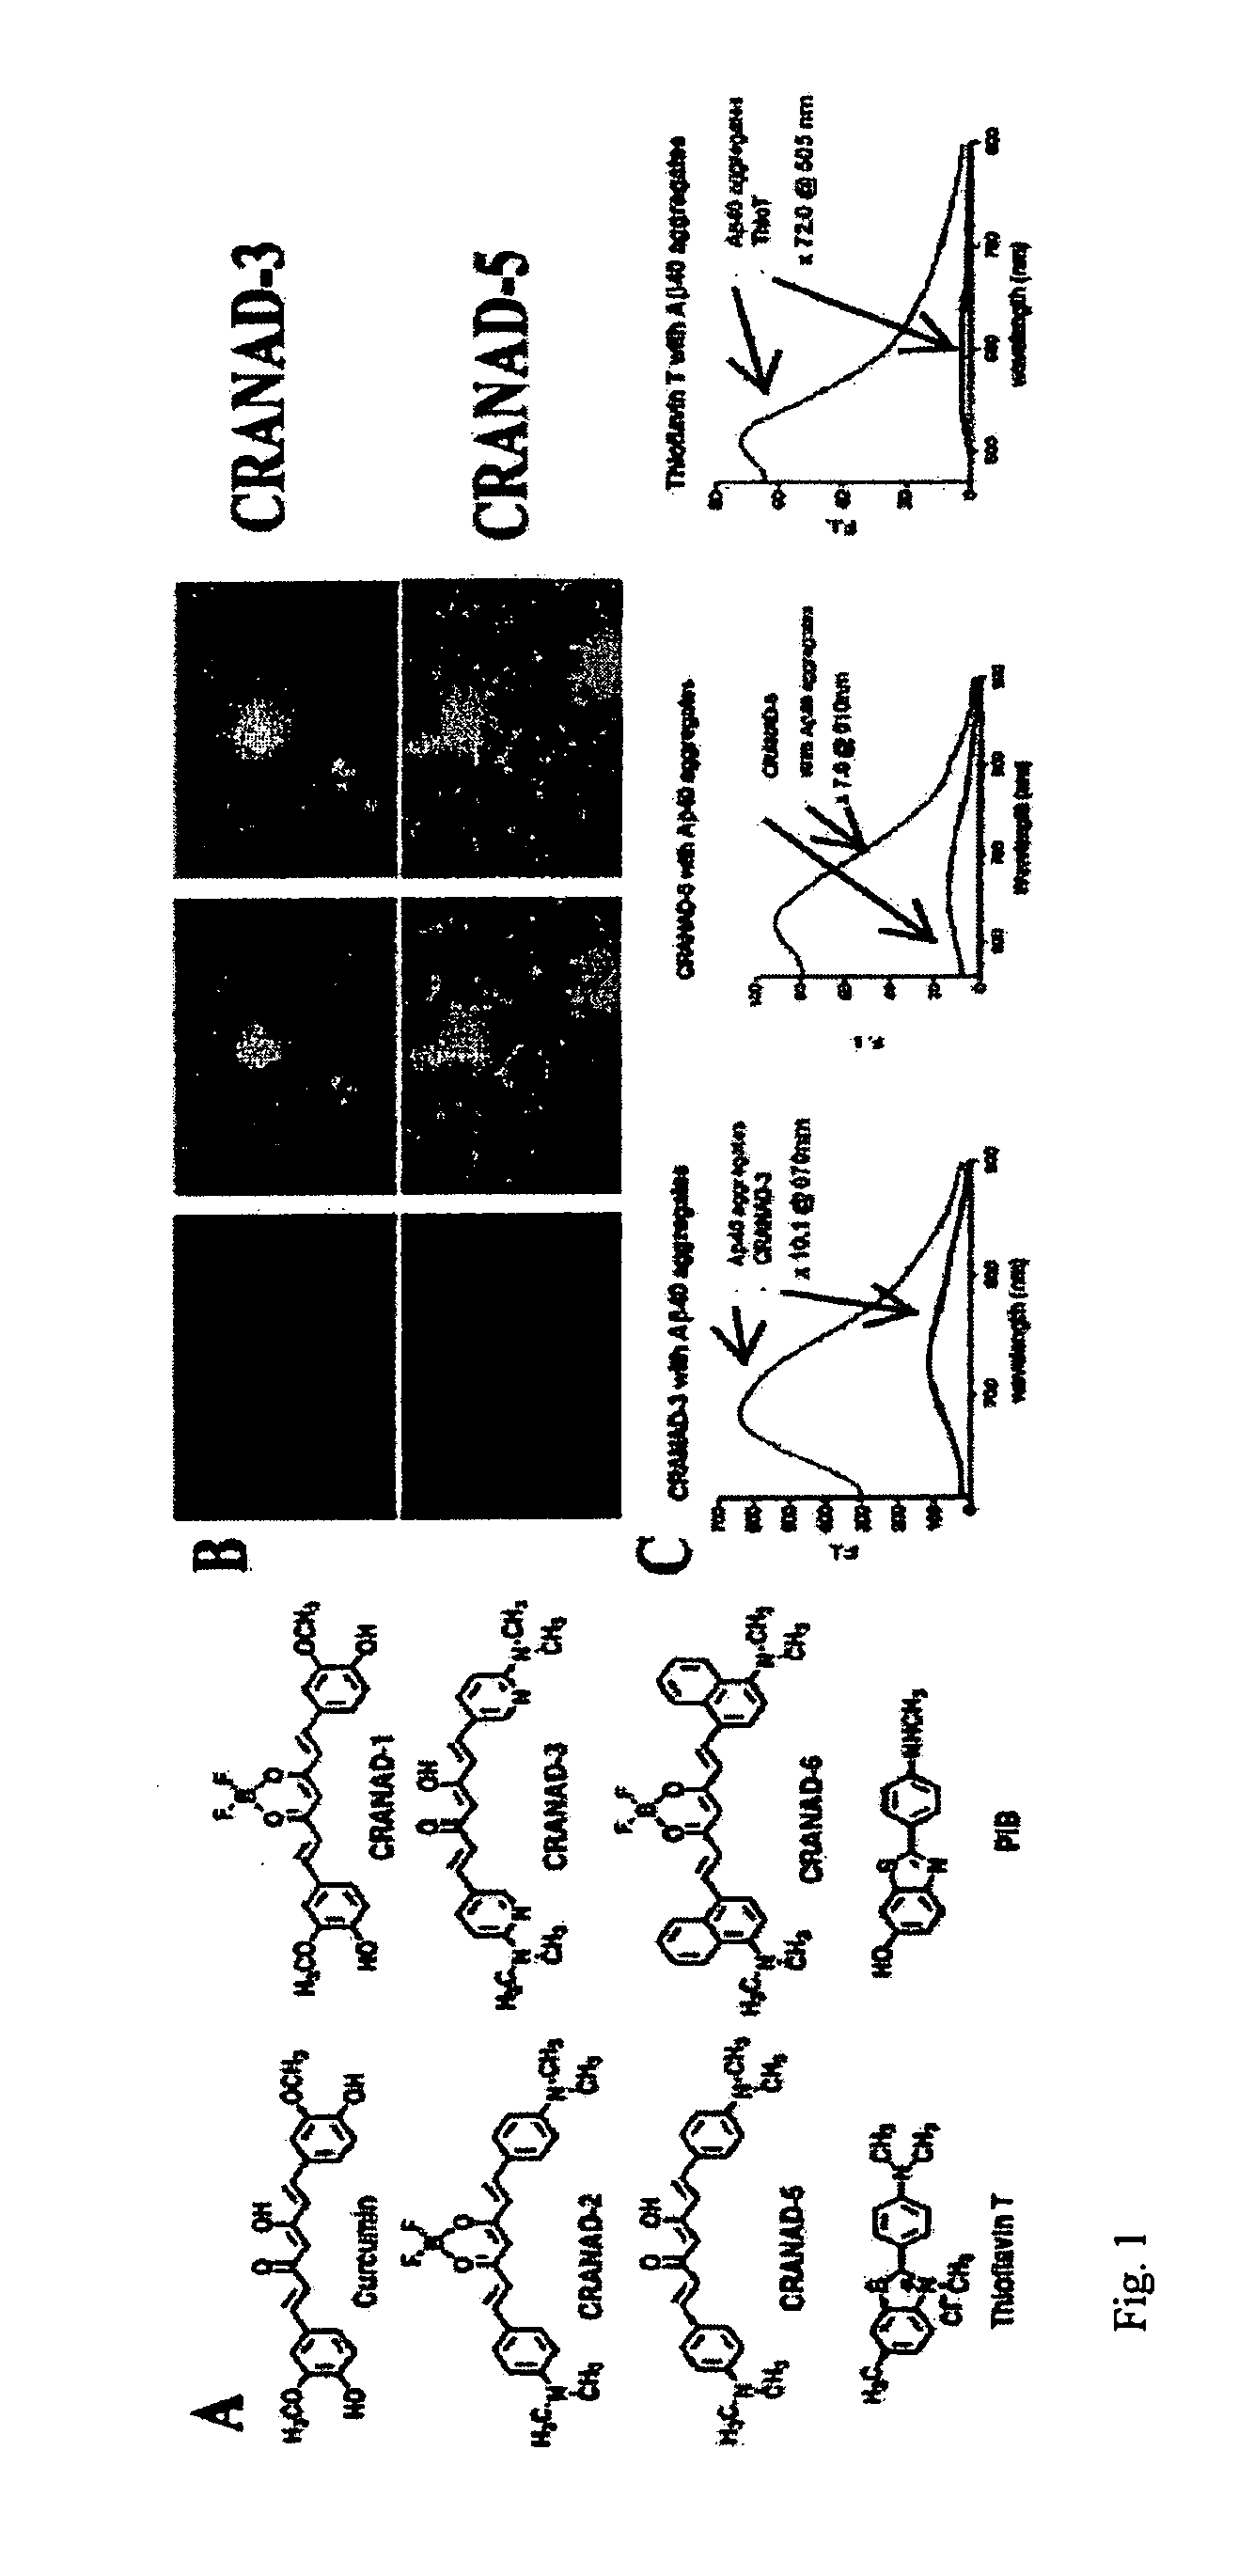 Methods and System for Detecting Soluble Amyloid-Beta